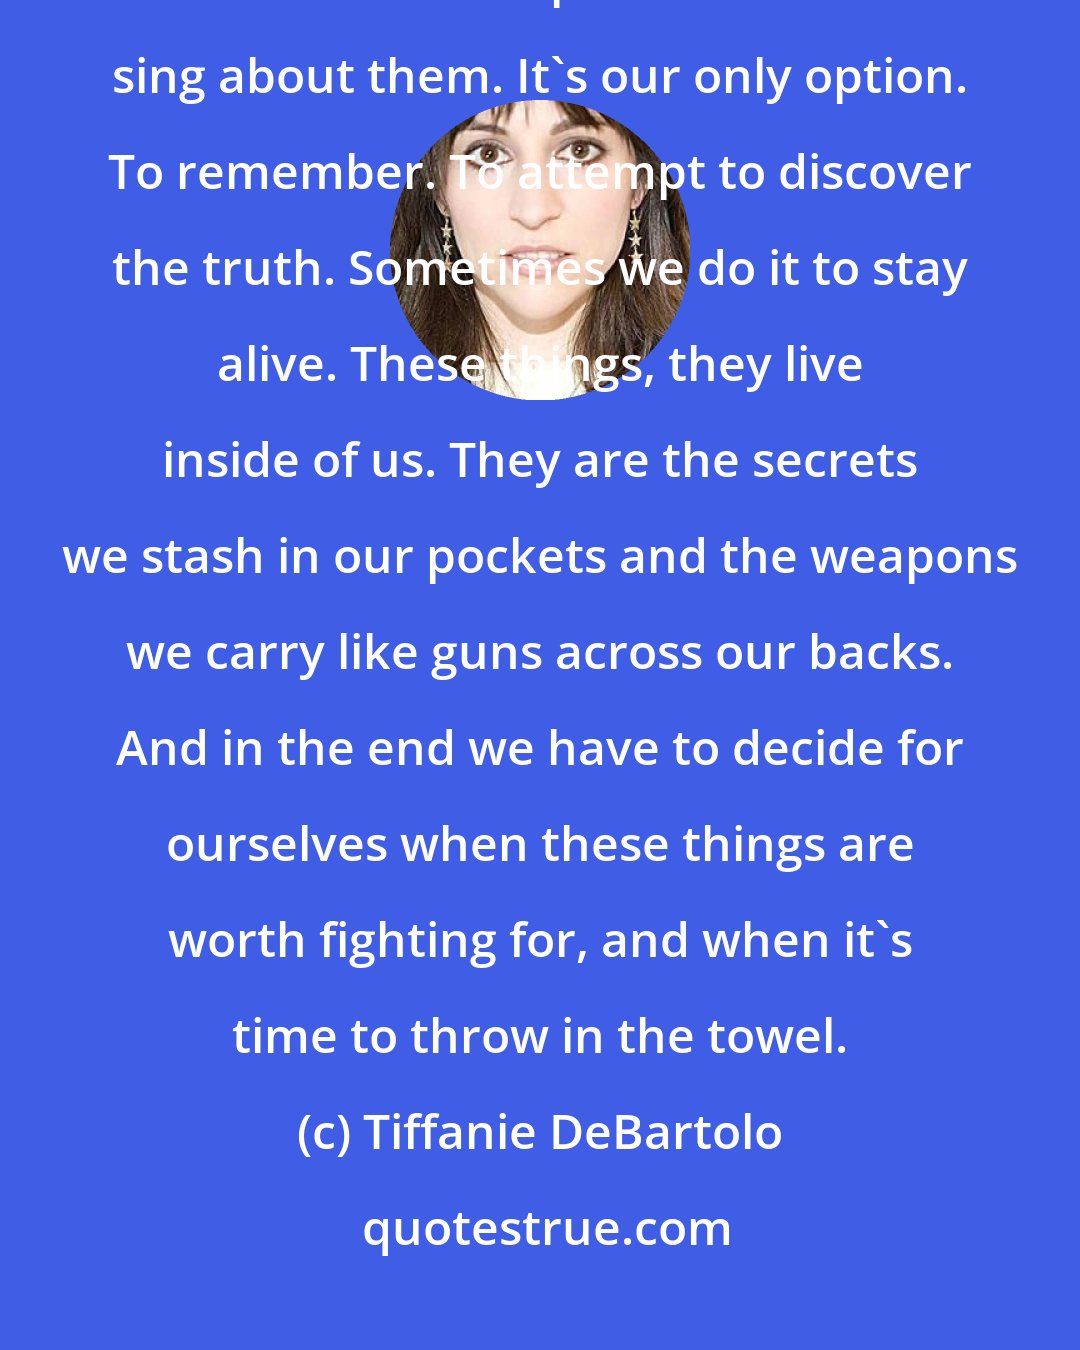 Tiffanie DeBartolo: There are things we never tell anyone. We want to but we can't. So we write them down. Or we paint them. Or we sing about them. It's our only option. To remember. To attempt to discover the truth. Sometimes we do it to stay alive. These things, they live inside of us. They are the secrets we stash in our pockets and the weapons we carry like guns across our backs. And in the end we have to decide for ourselves when these things are worth fighting for, and when it's time to throw in the towel.